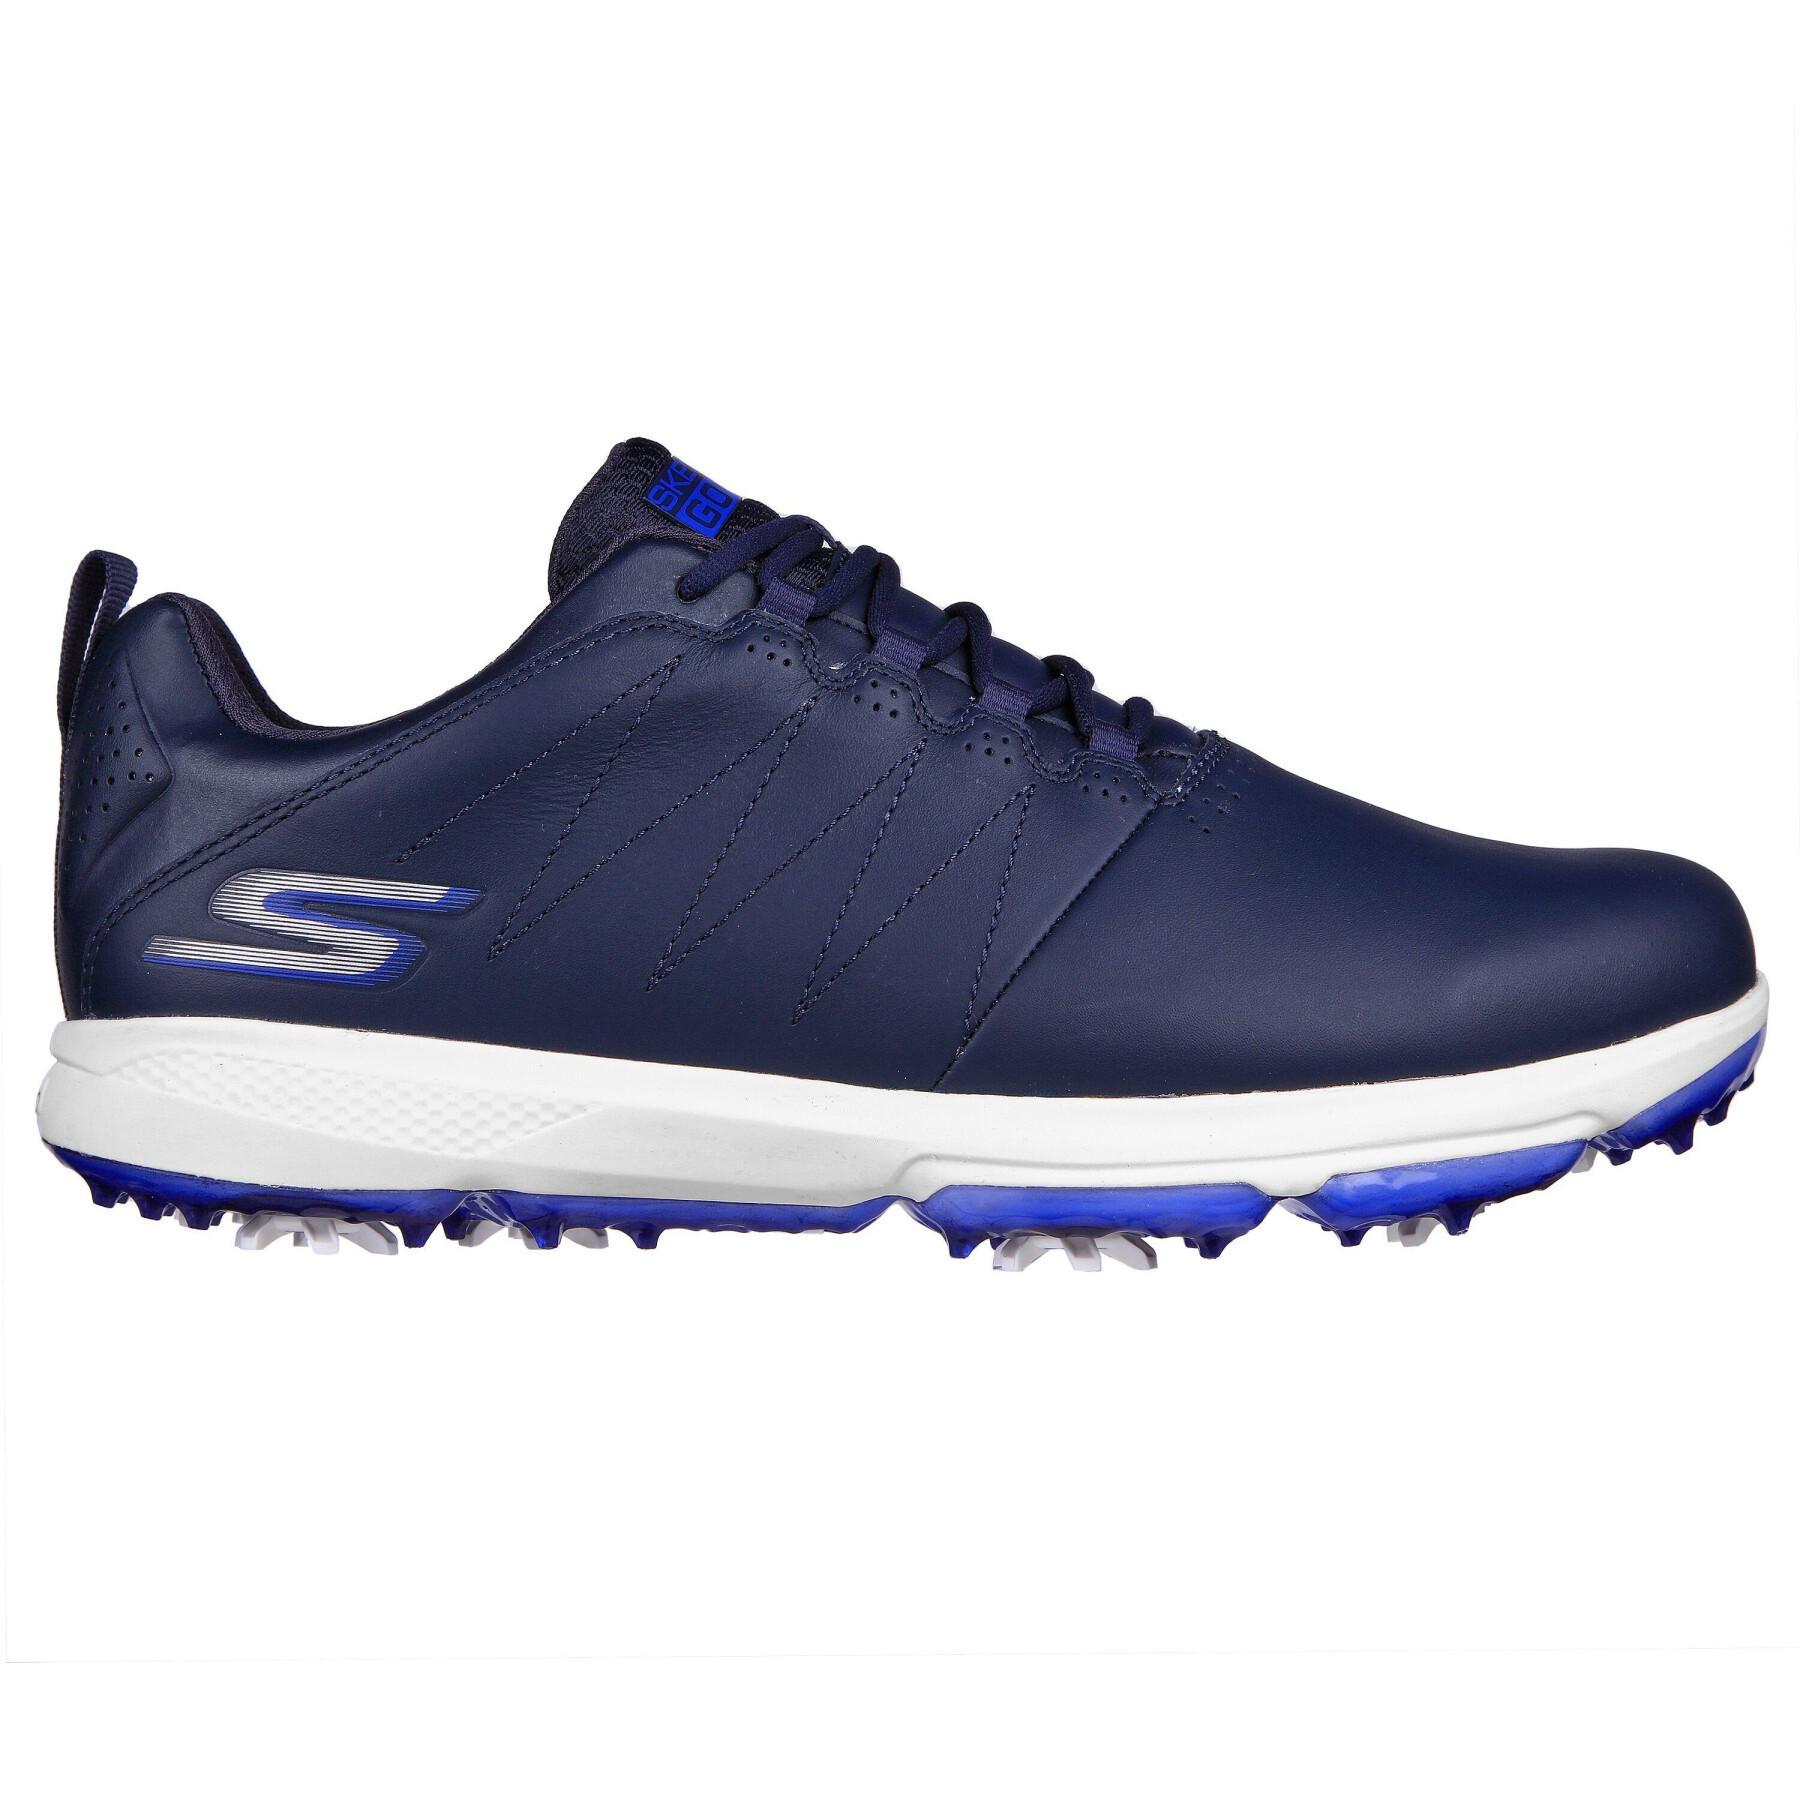 Golf shoes with spikes Skechers GO GOLF Pro 4 - Legacy